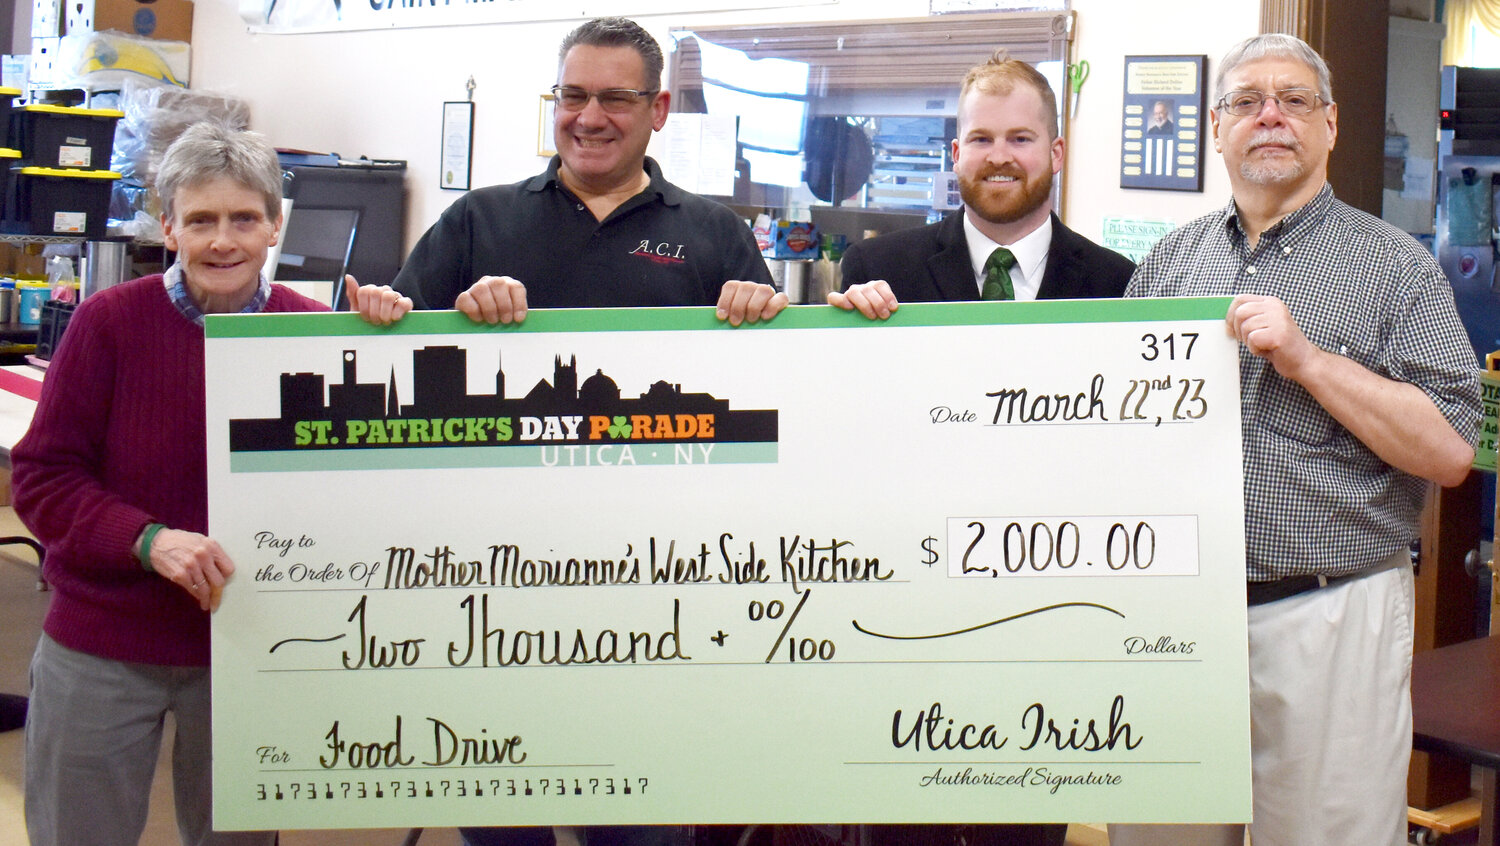 About 950 food items and $2,000 were collected at this year’s St. Patrick’s Day Parade in Utica and donated to Mother Marianne’s West Side Kitchen. Pictured above, from left: Chris Hoke and Bernie Adorino, co-organizers of the parade Food Drive, Patrick McGrath, co-director of the St. Patrick’s Day Parade Committee, and Mike Pilat, director of Mother Marianne’s West Side Kitchen.